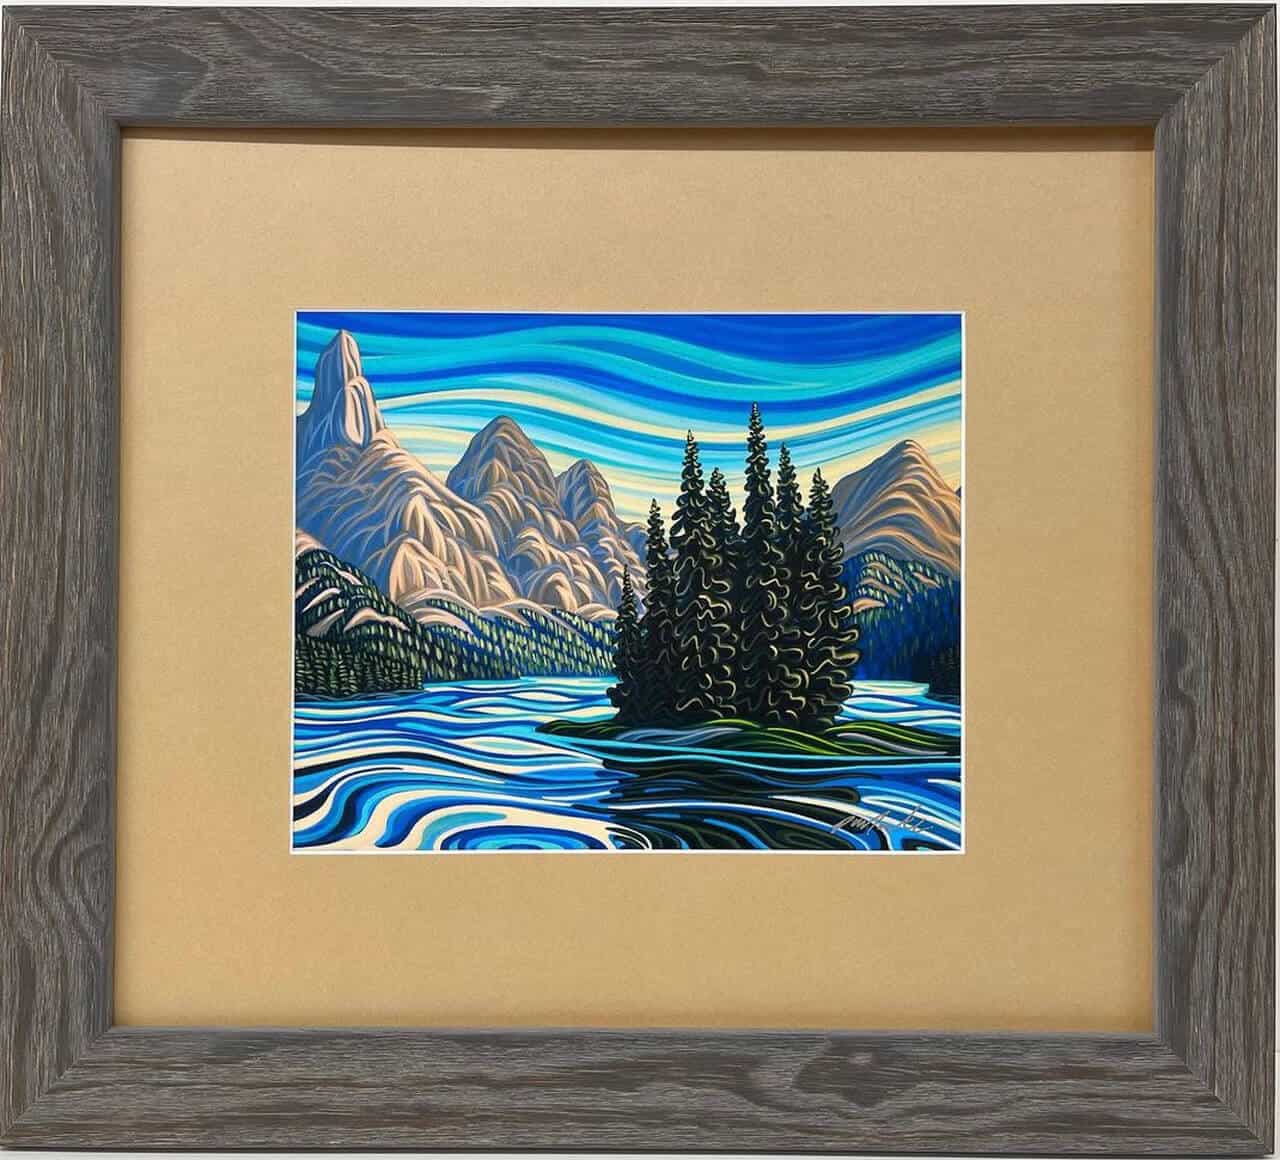 A painting of mountains and water in a frame.